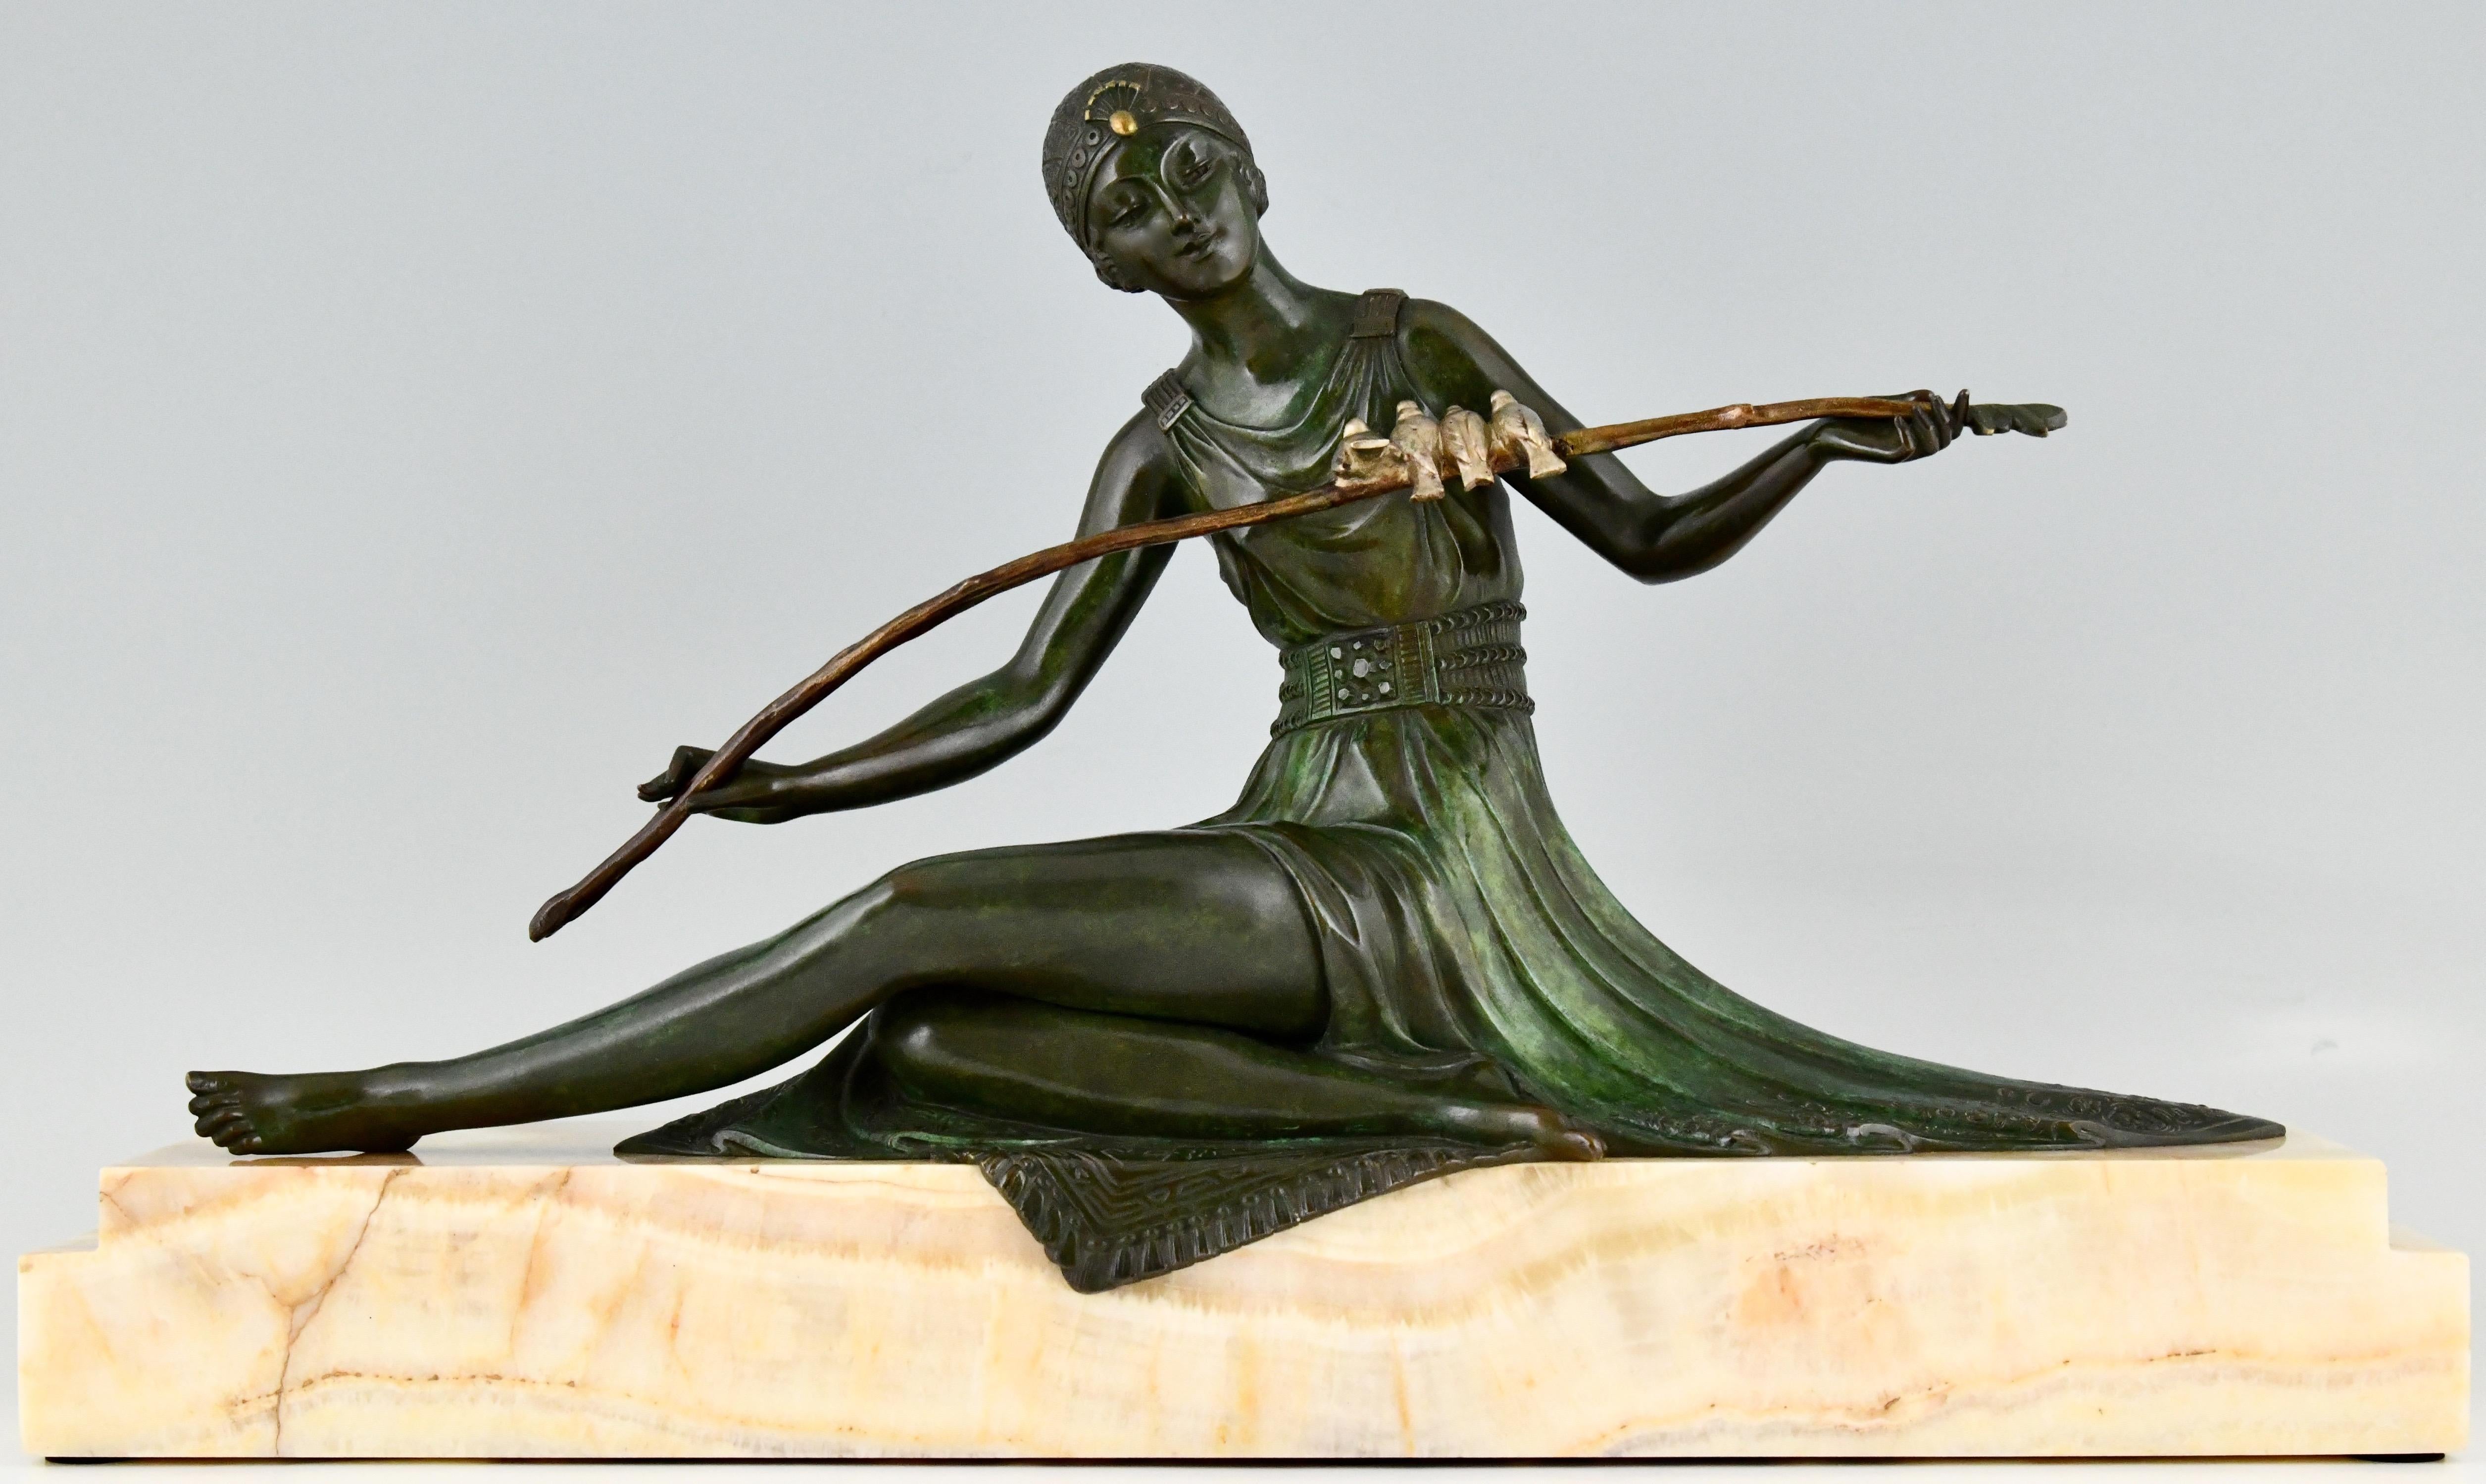 Art Deco bronze sculpture of a seated lady holding a branch with birds
by the well known French artist Joe Descomps.
The bronze has a beautiful patina and is mounted on a yellow marble base. Ca. 1930. 

Literature: “Art Deco and other figures”